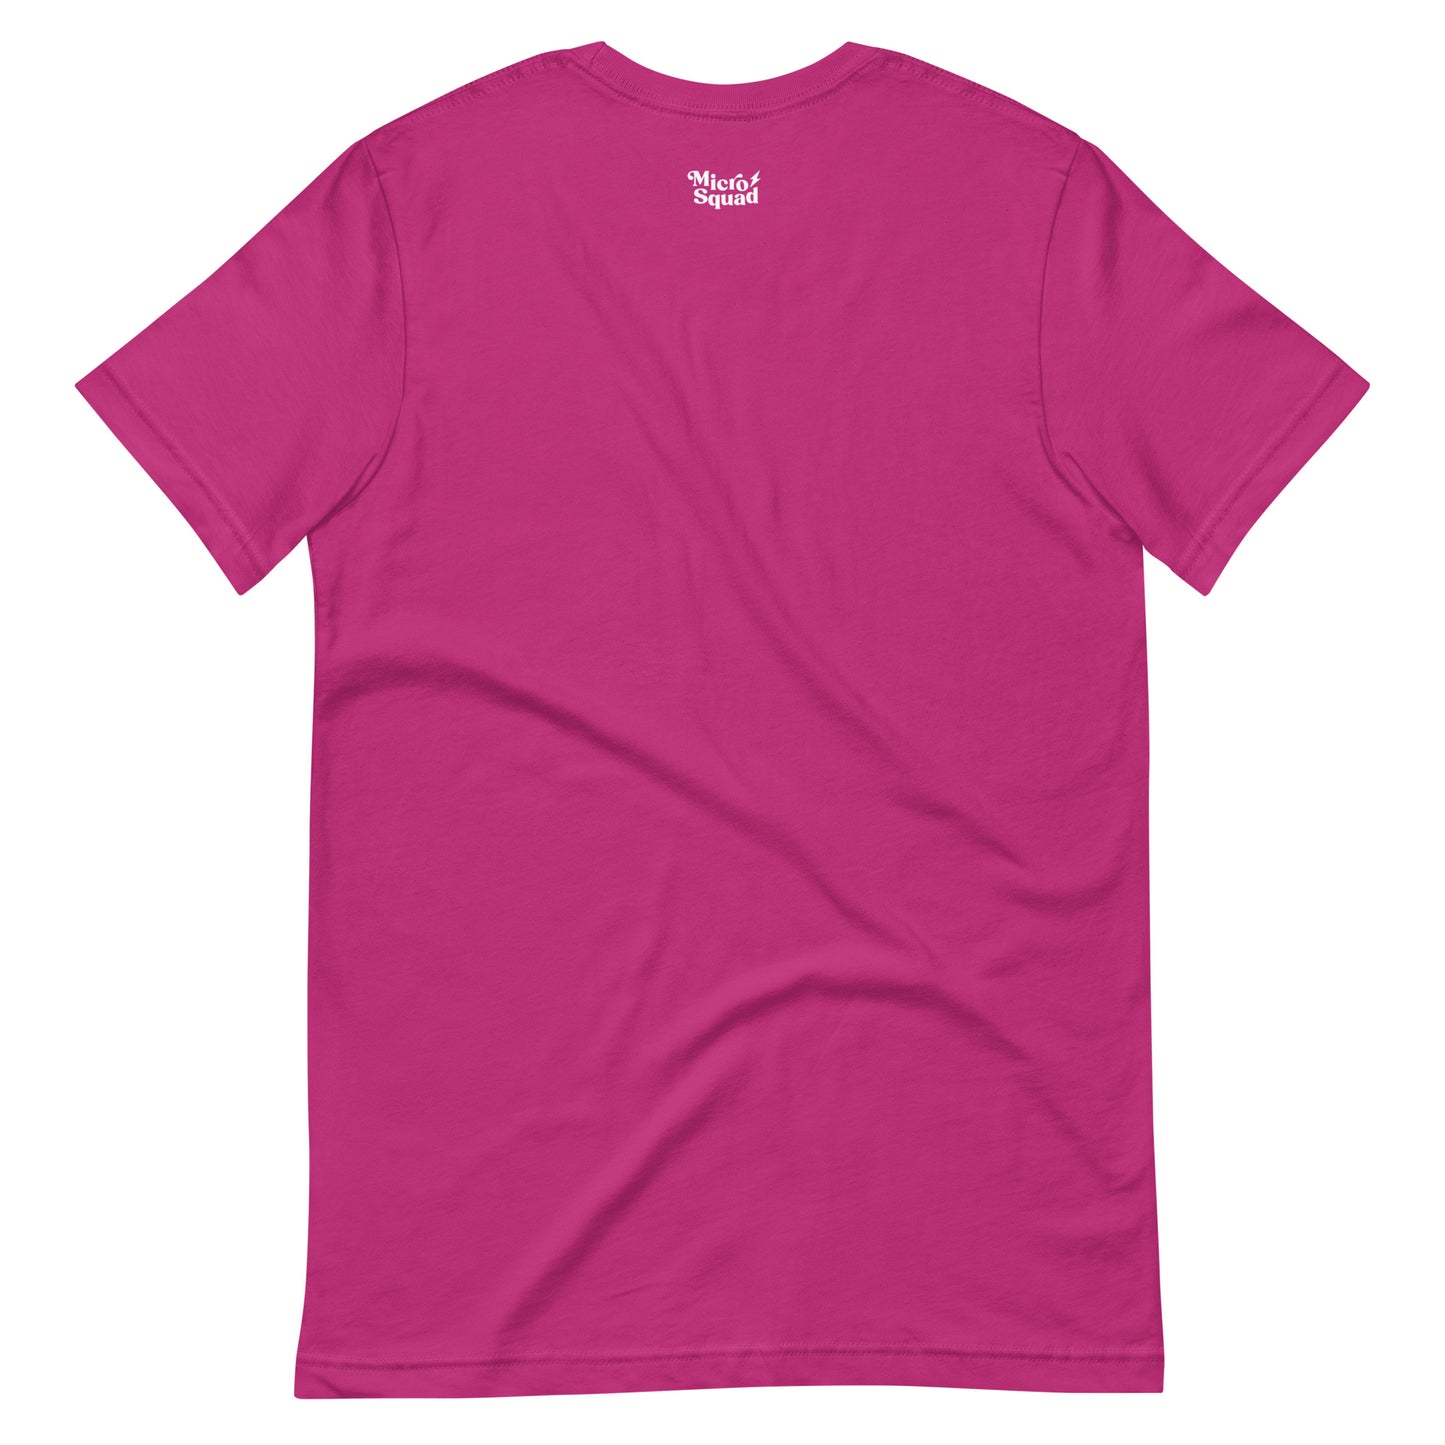 I Like It Spicy Unisex Shirt in Berry